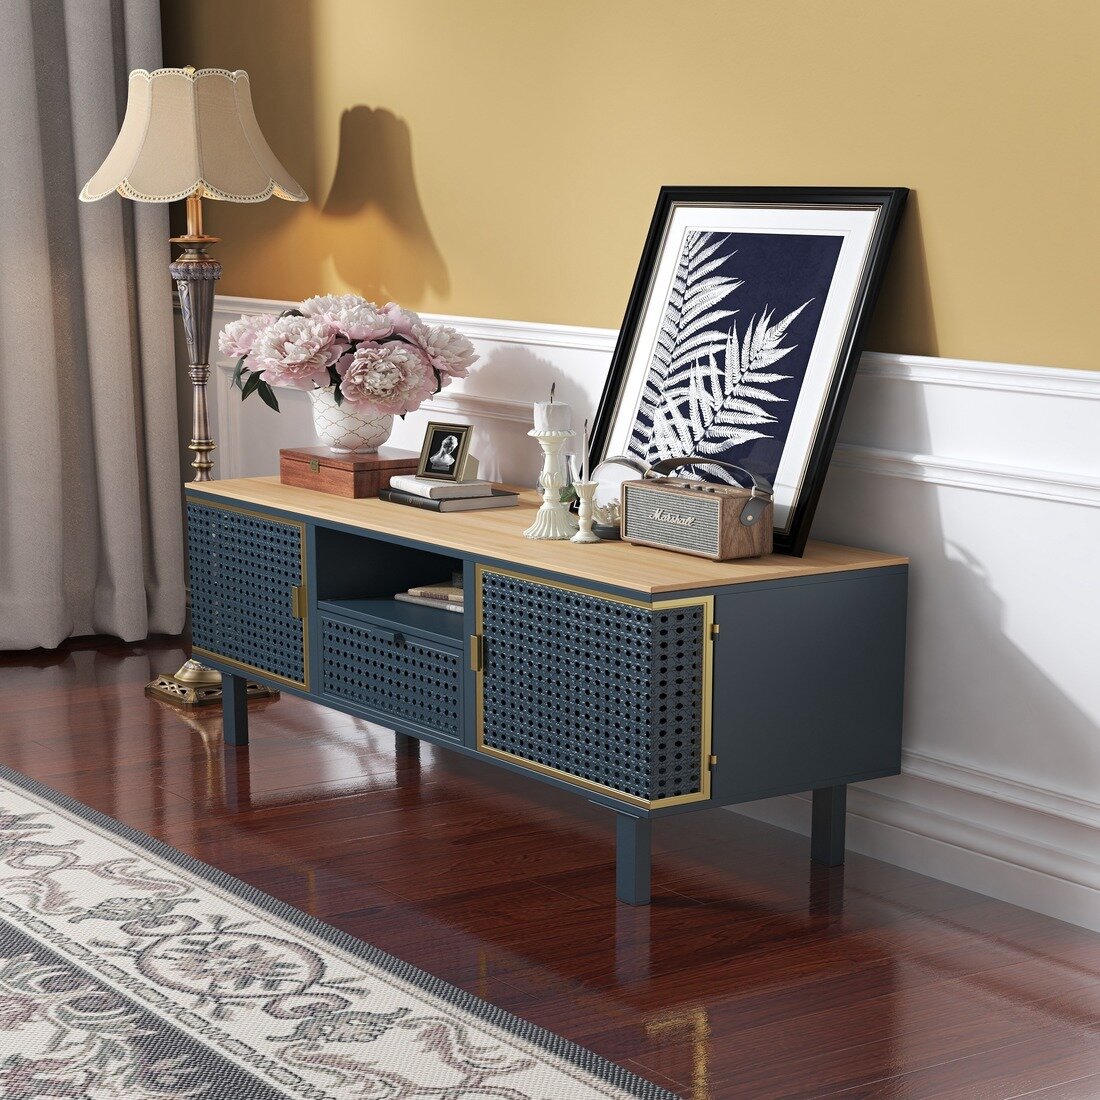 Details about   Living Room TV Cabinet w/ 3 Drawers Solid Reclaimed Wood Media Console Stander 